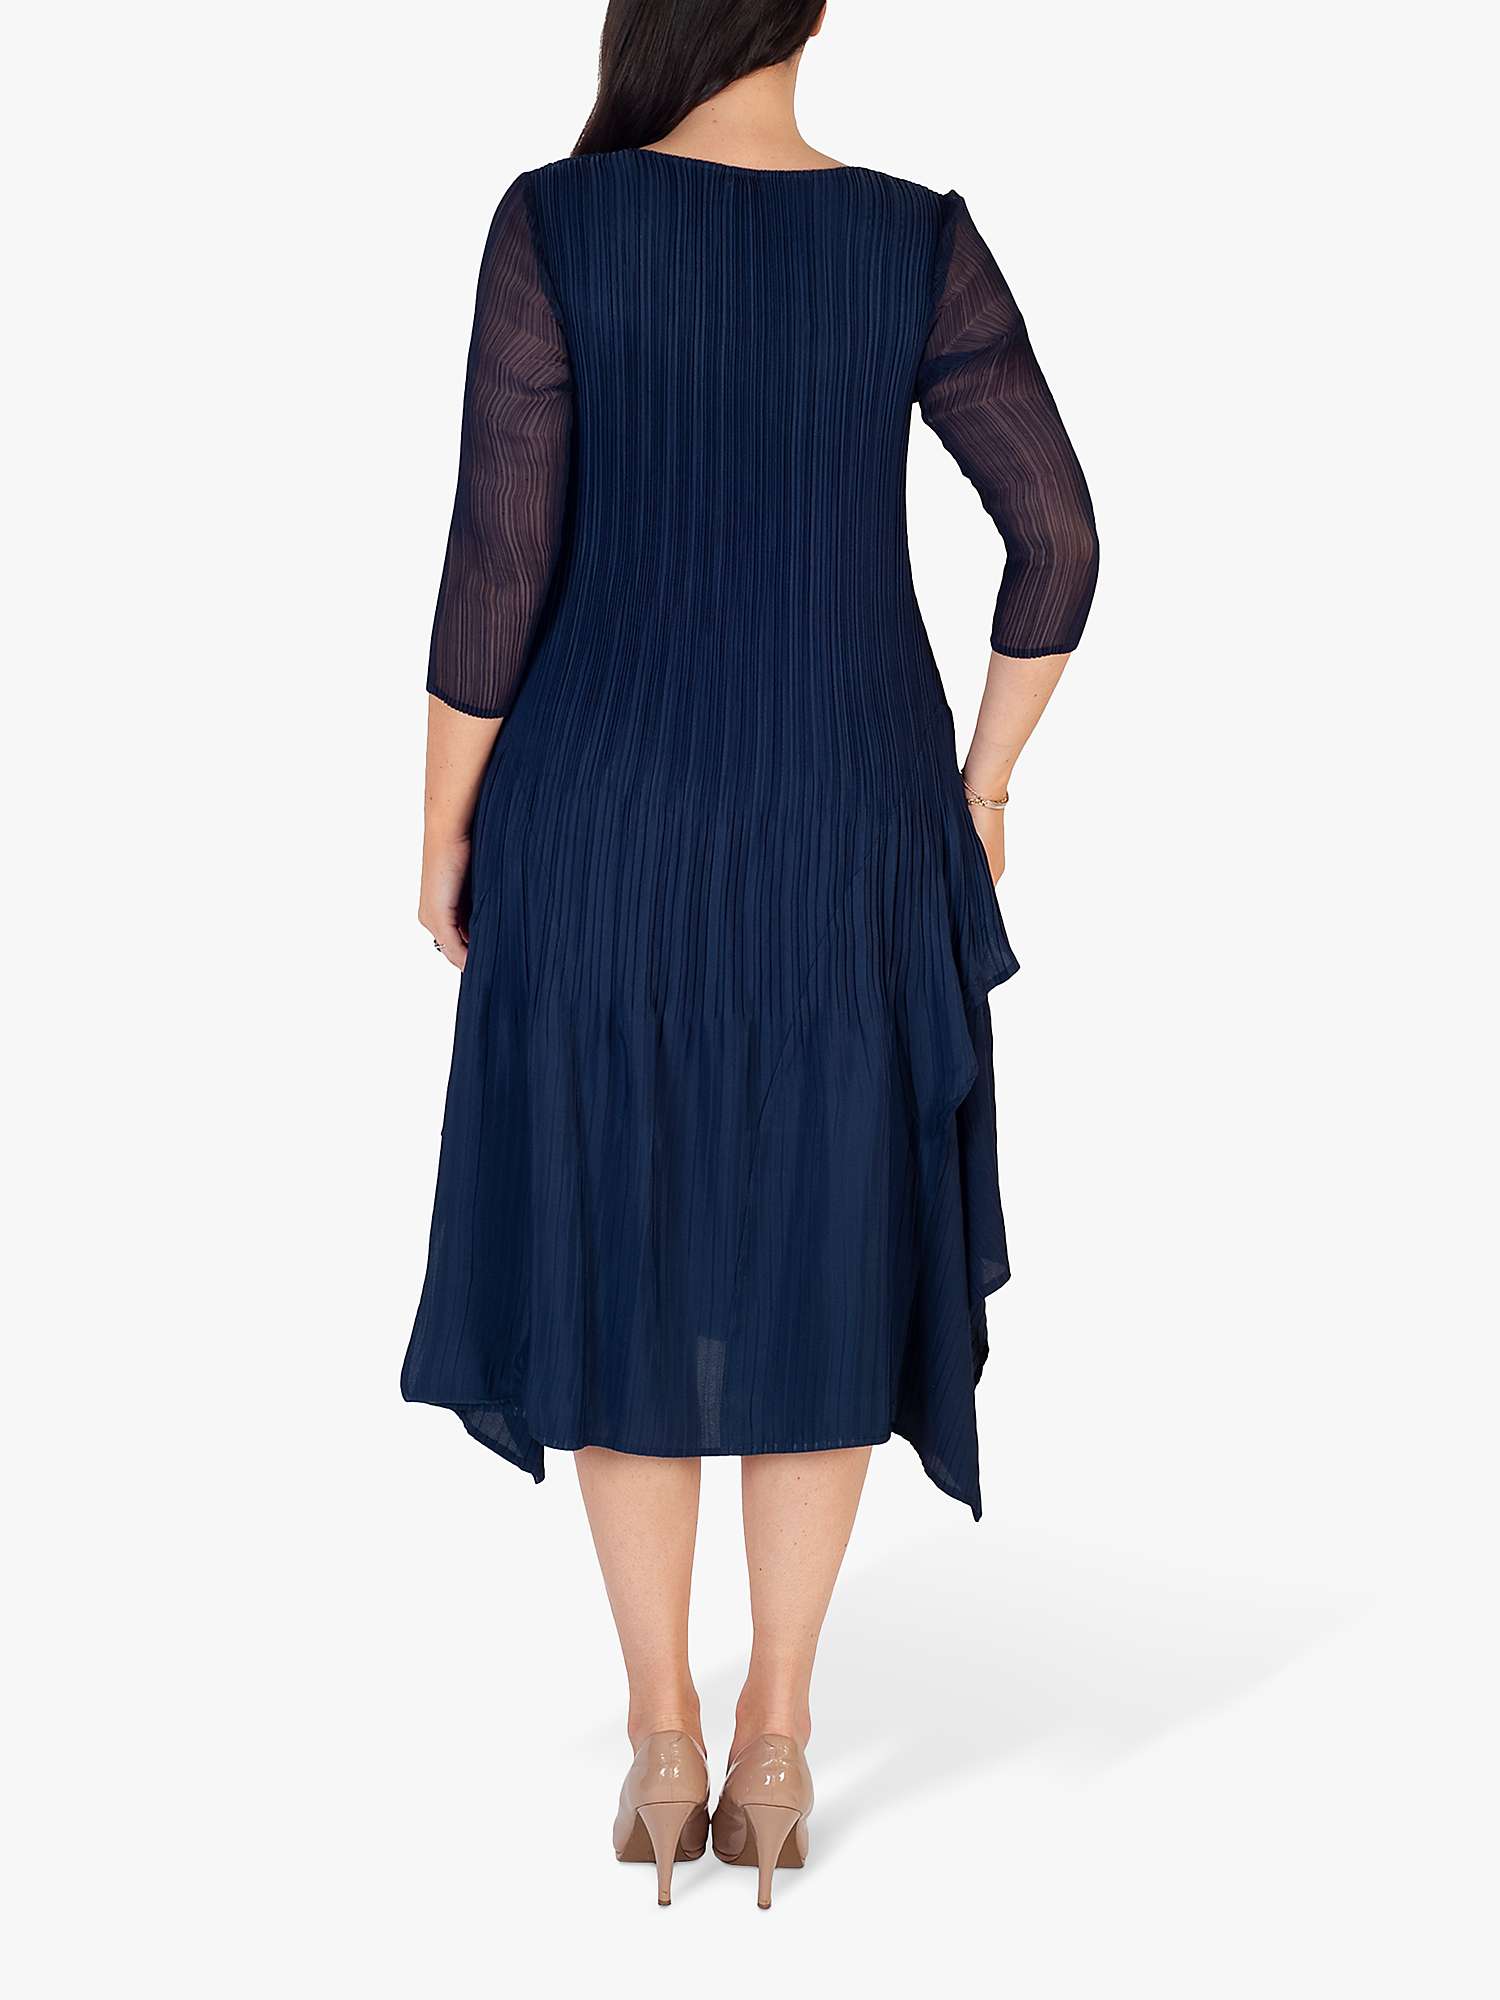 Buy chesca Crush Pleat Layered Dress Online at johnlewis.com